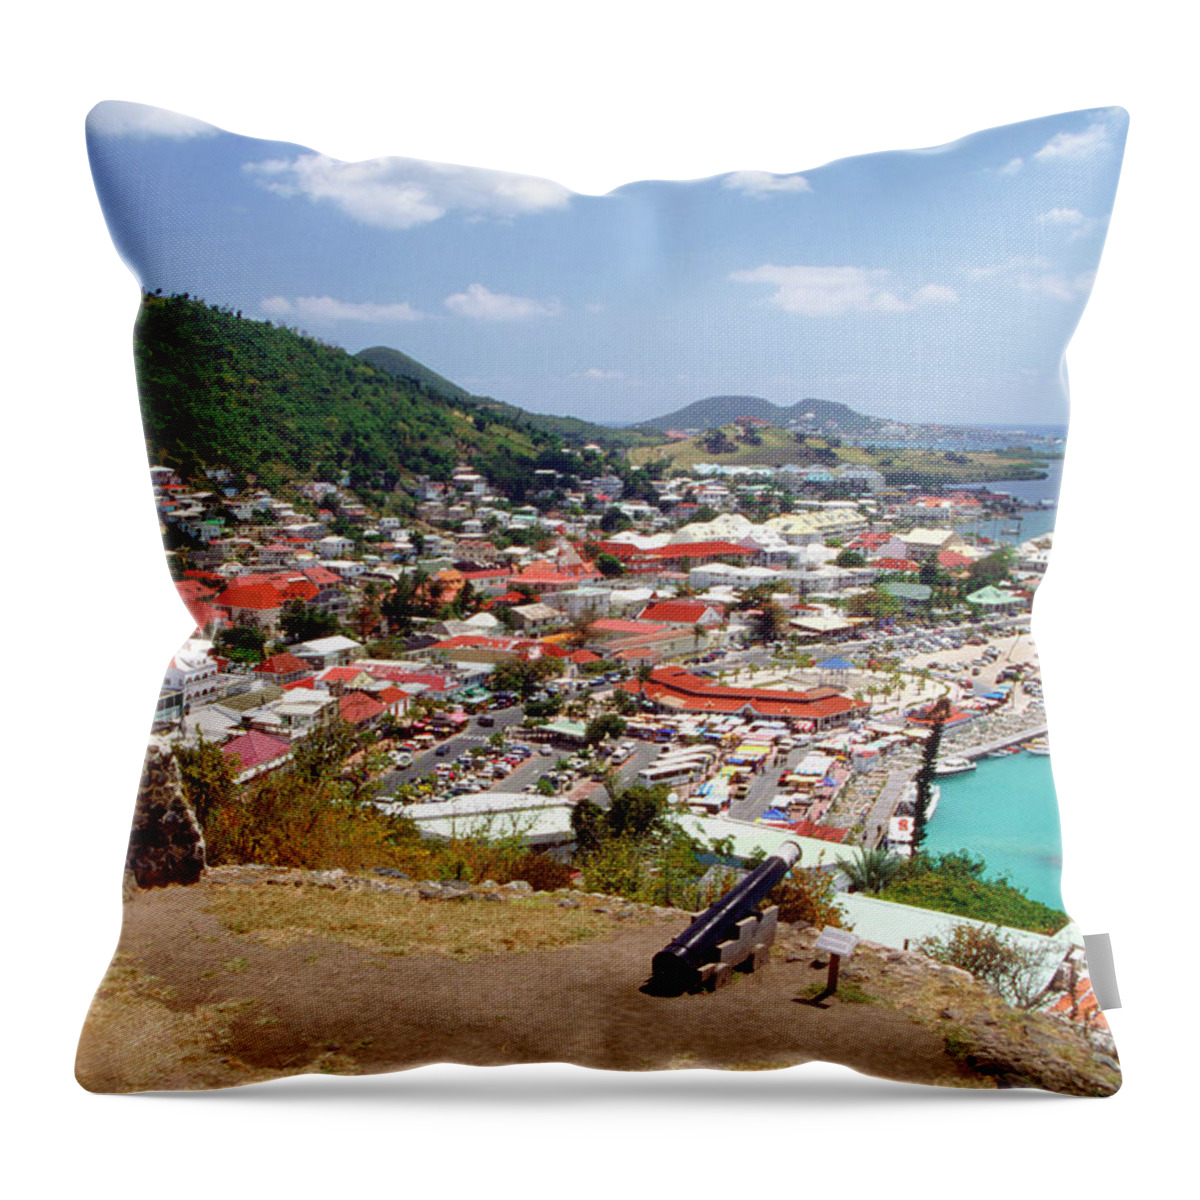 Scenics Throw Pillow featuring the photograph View Of Marigot Bay From St. Louis by Medioimages/photodisc